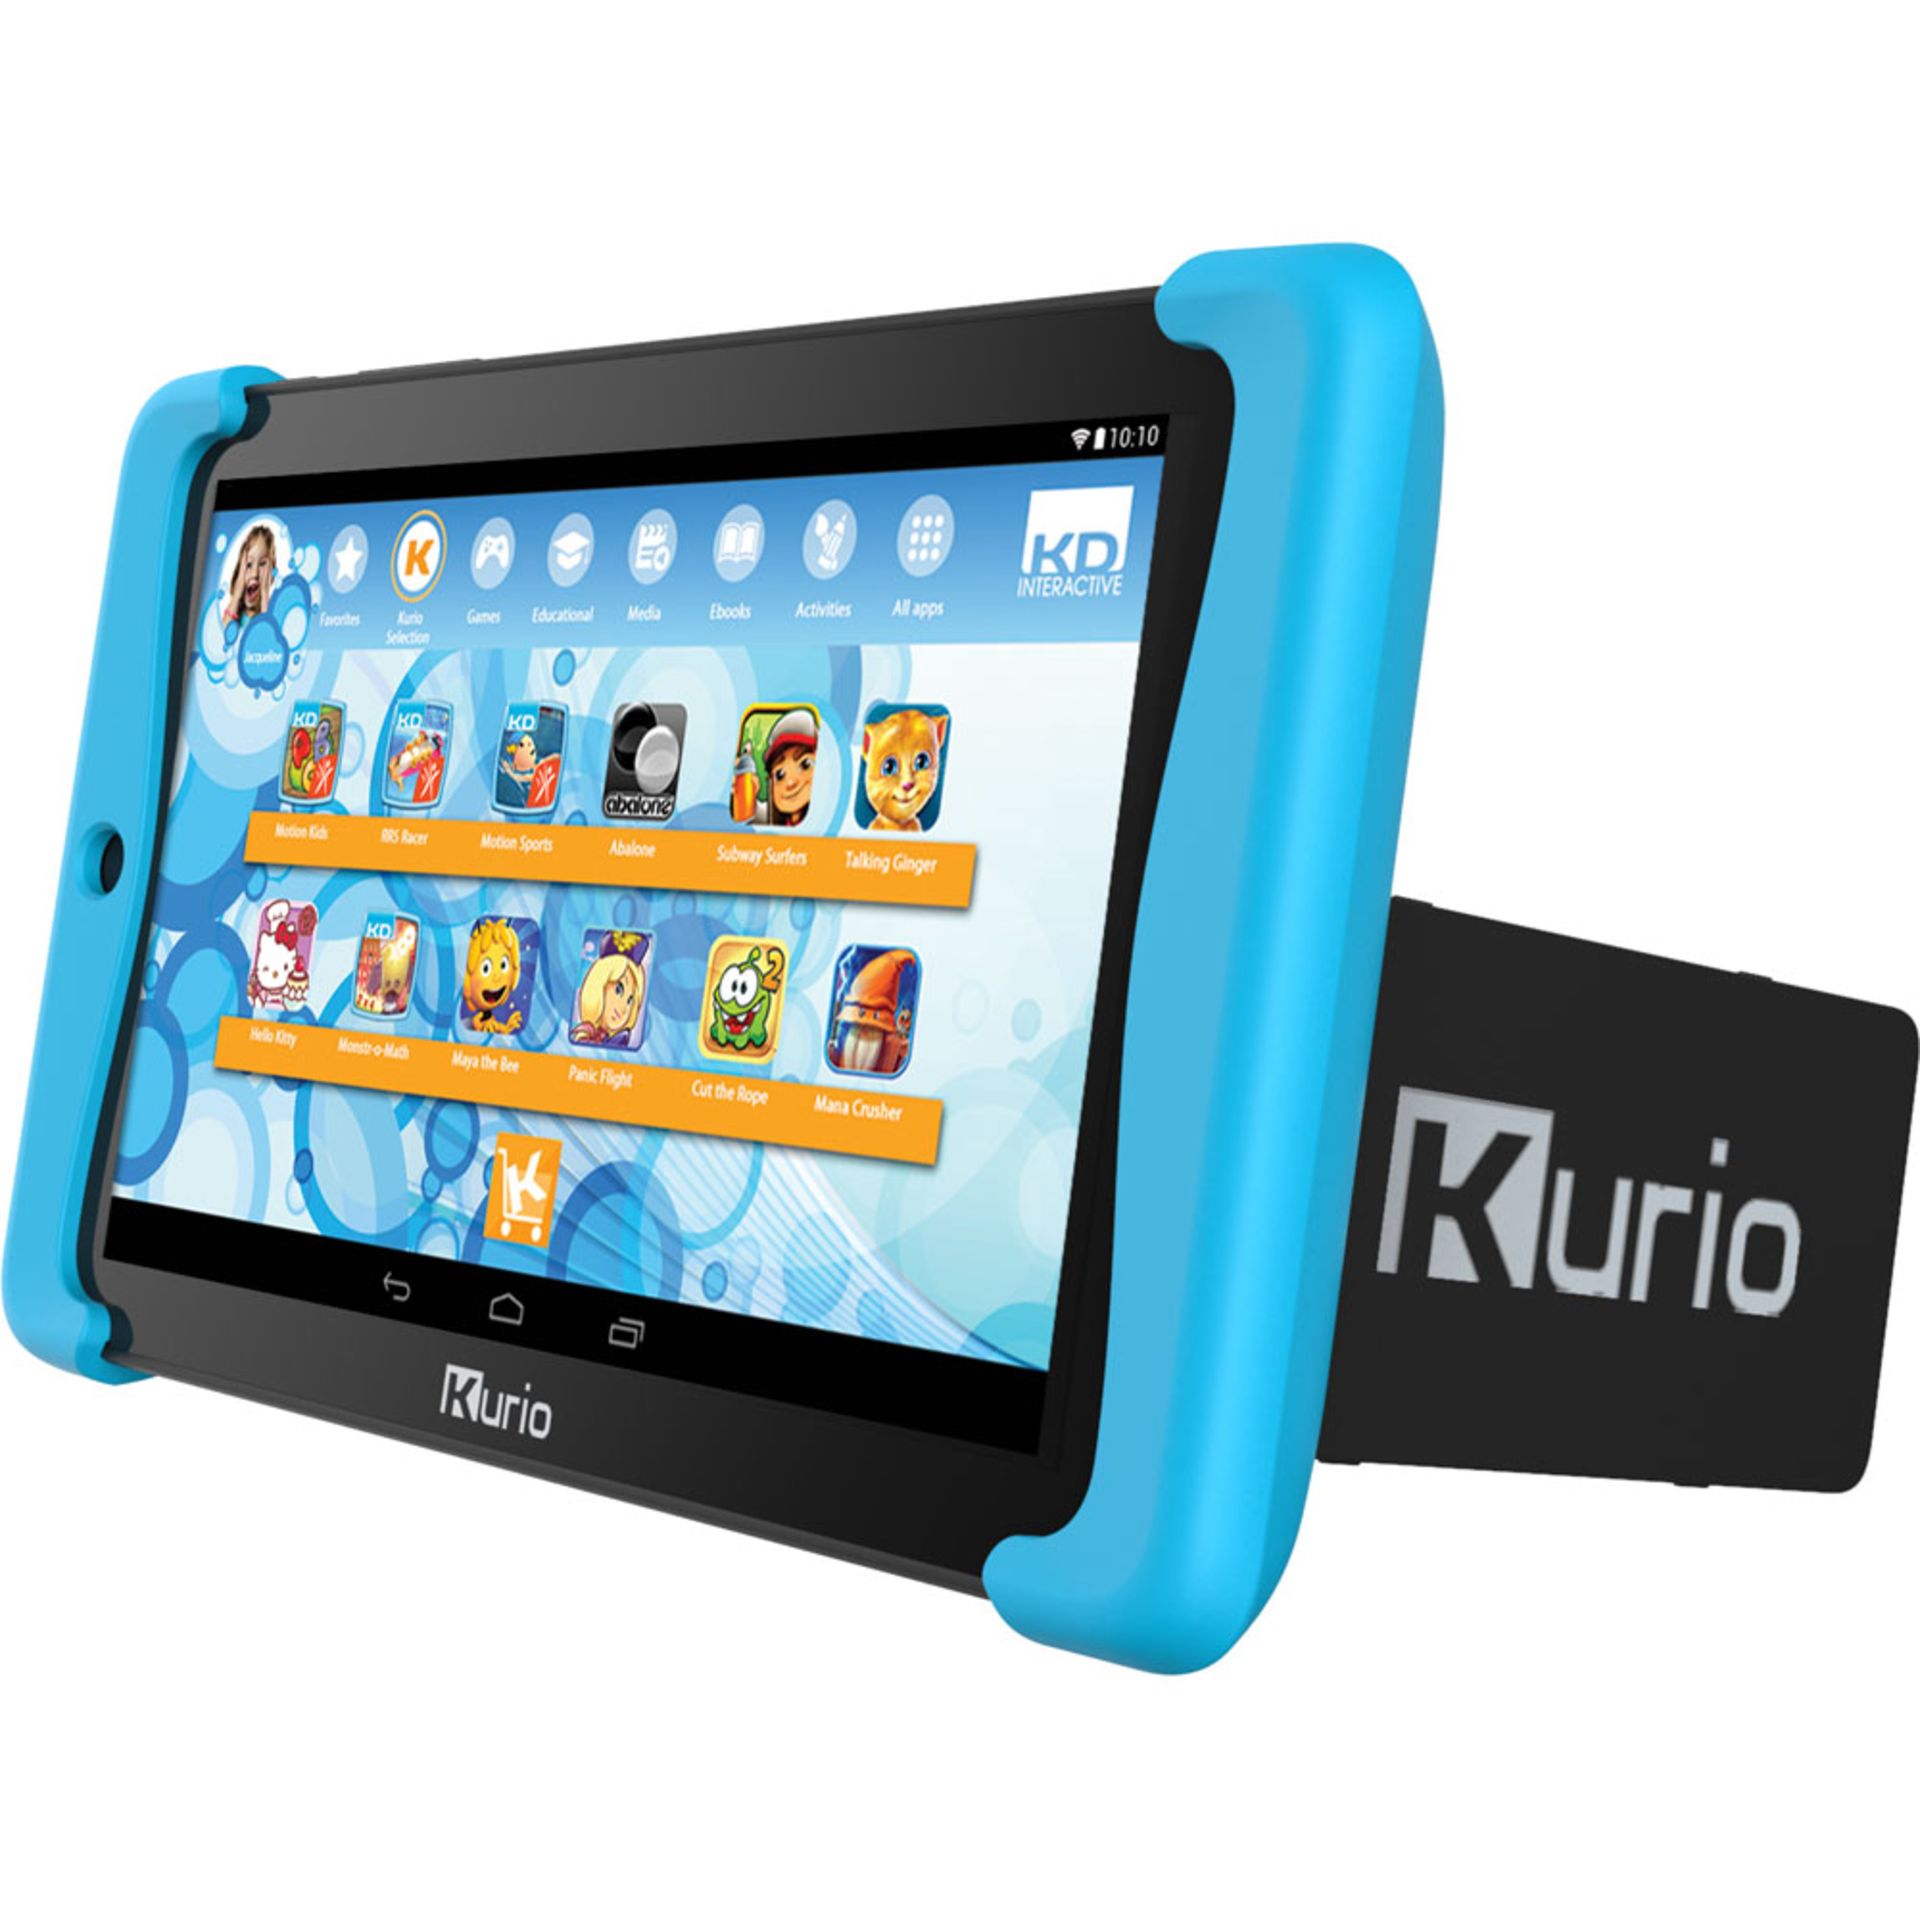 V Grade A Kurio Tab2 Motion Edition 7" Screen 8Gb Storage Children's Tablet Preloaded With 40